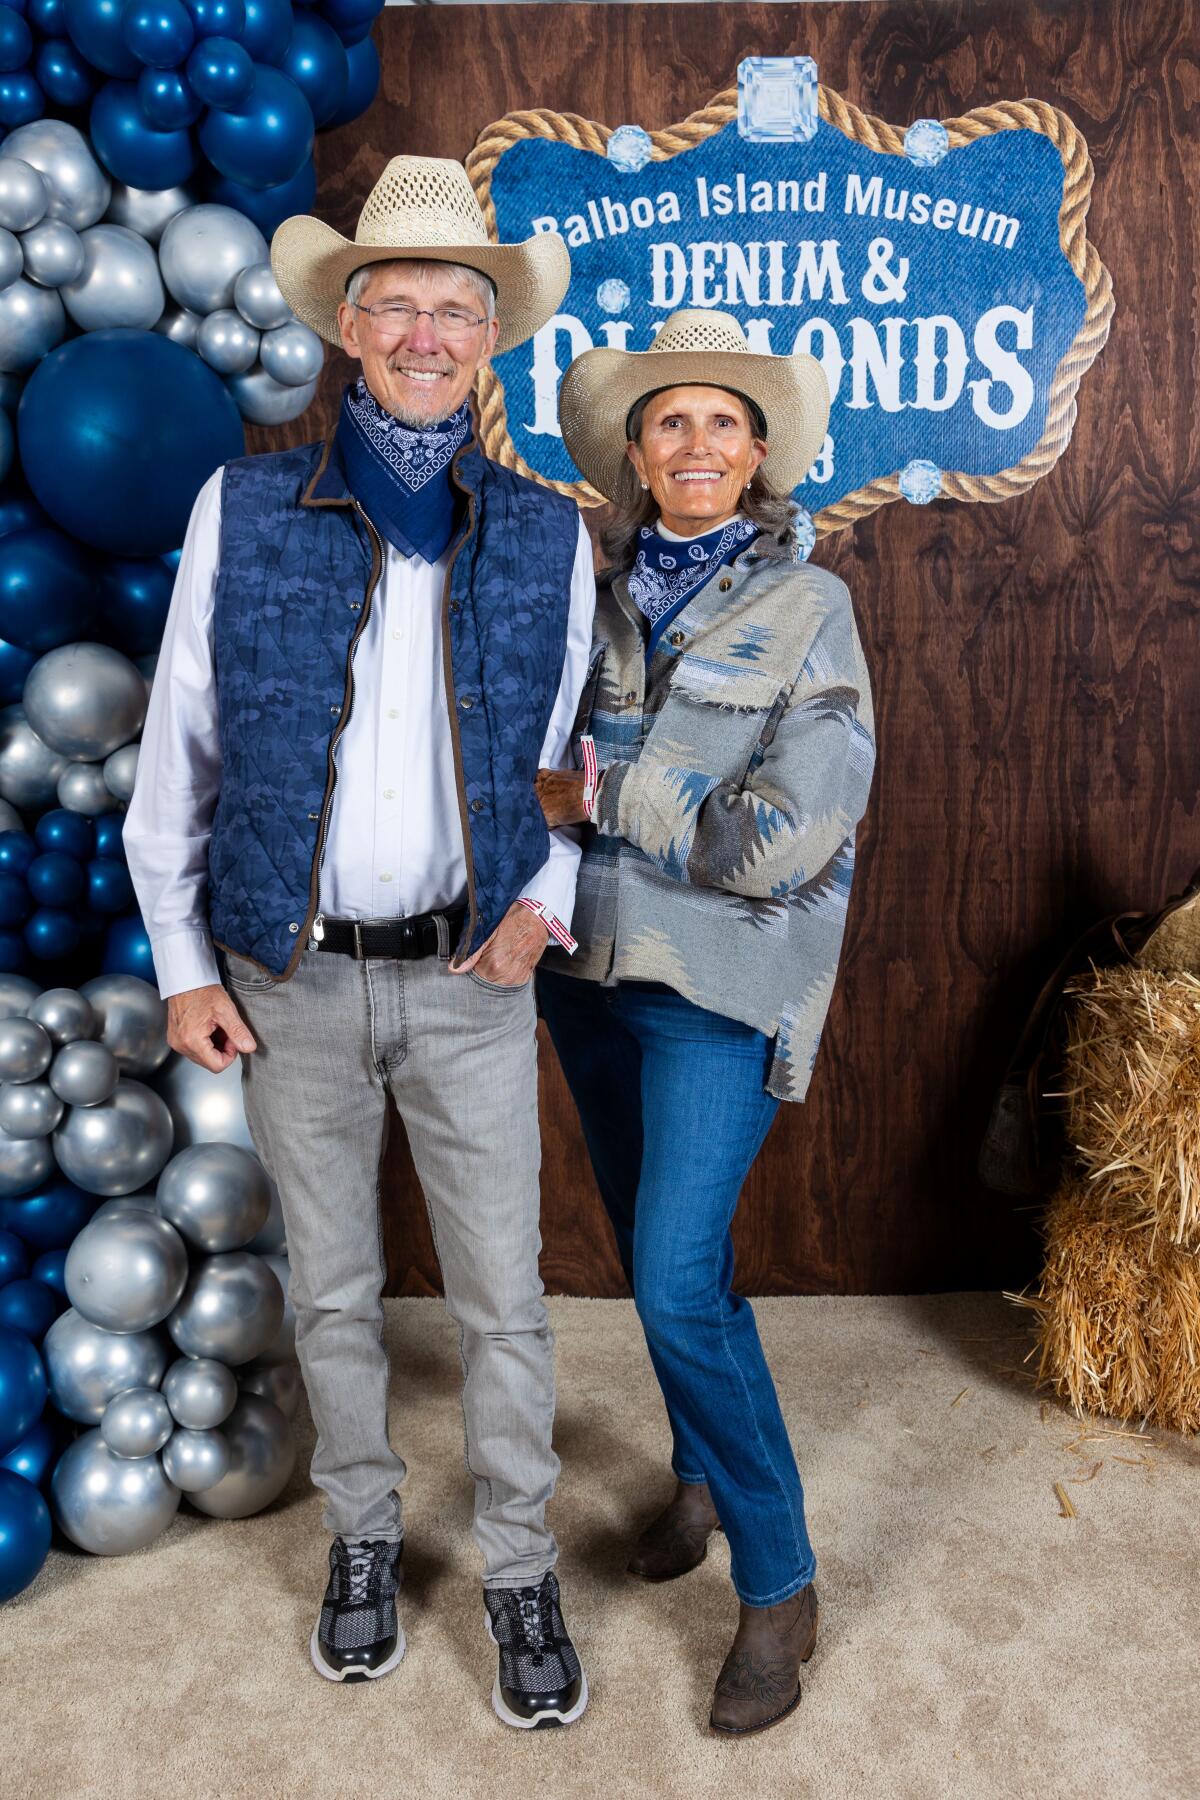 Museum Board President John Conners and Dianna Conners dressed the part.